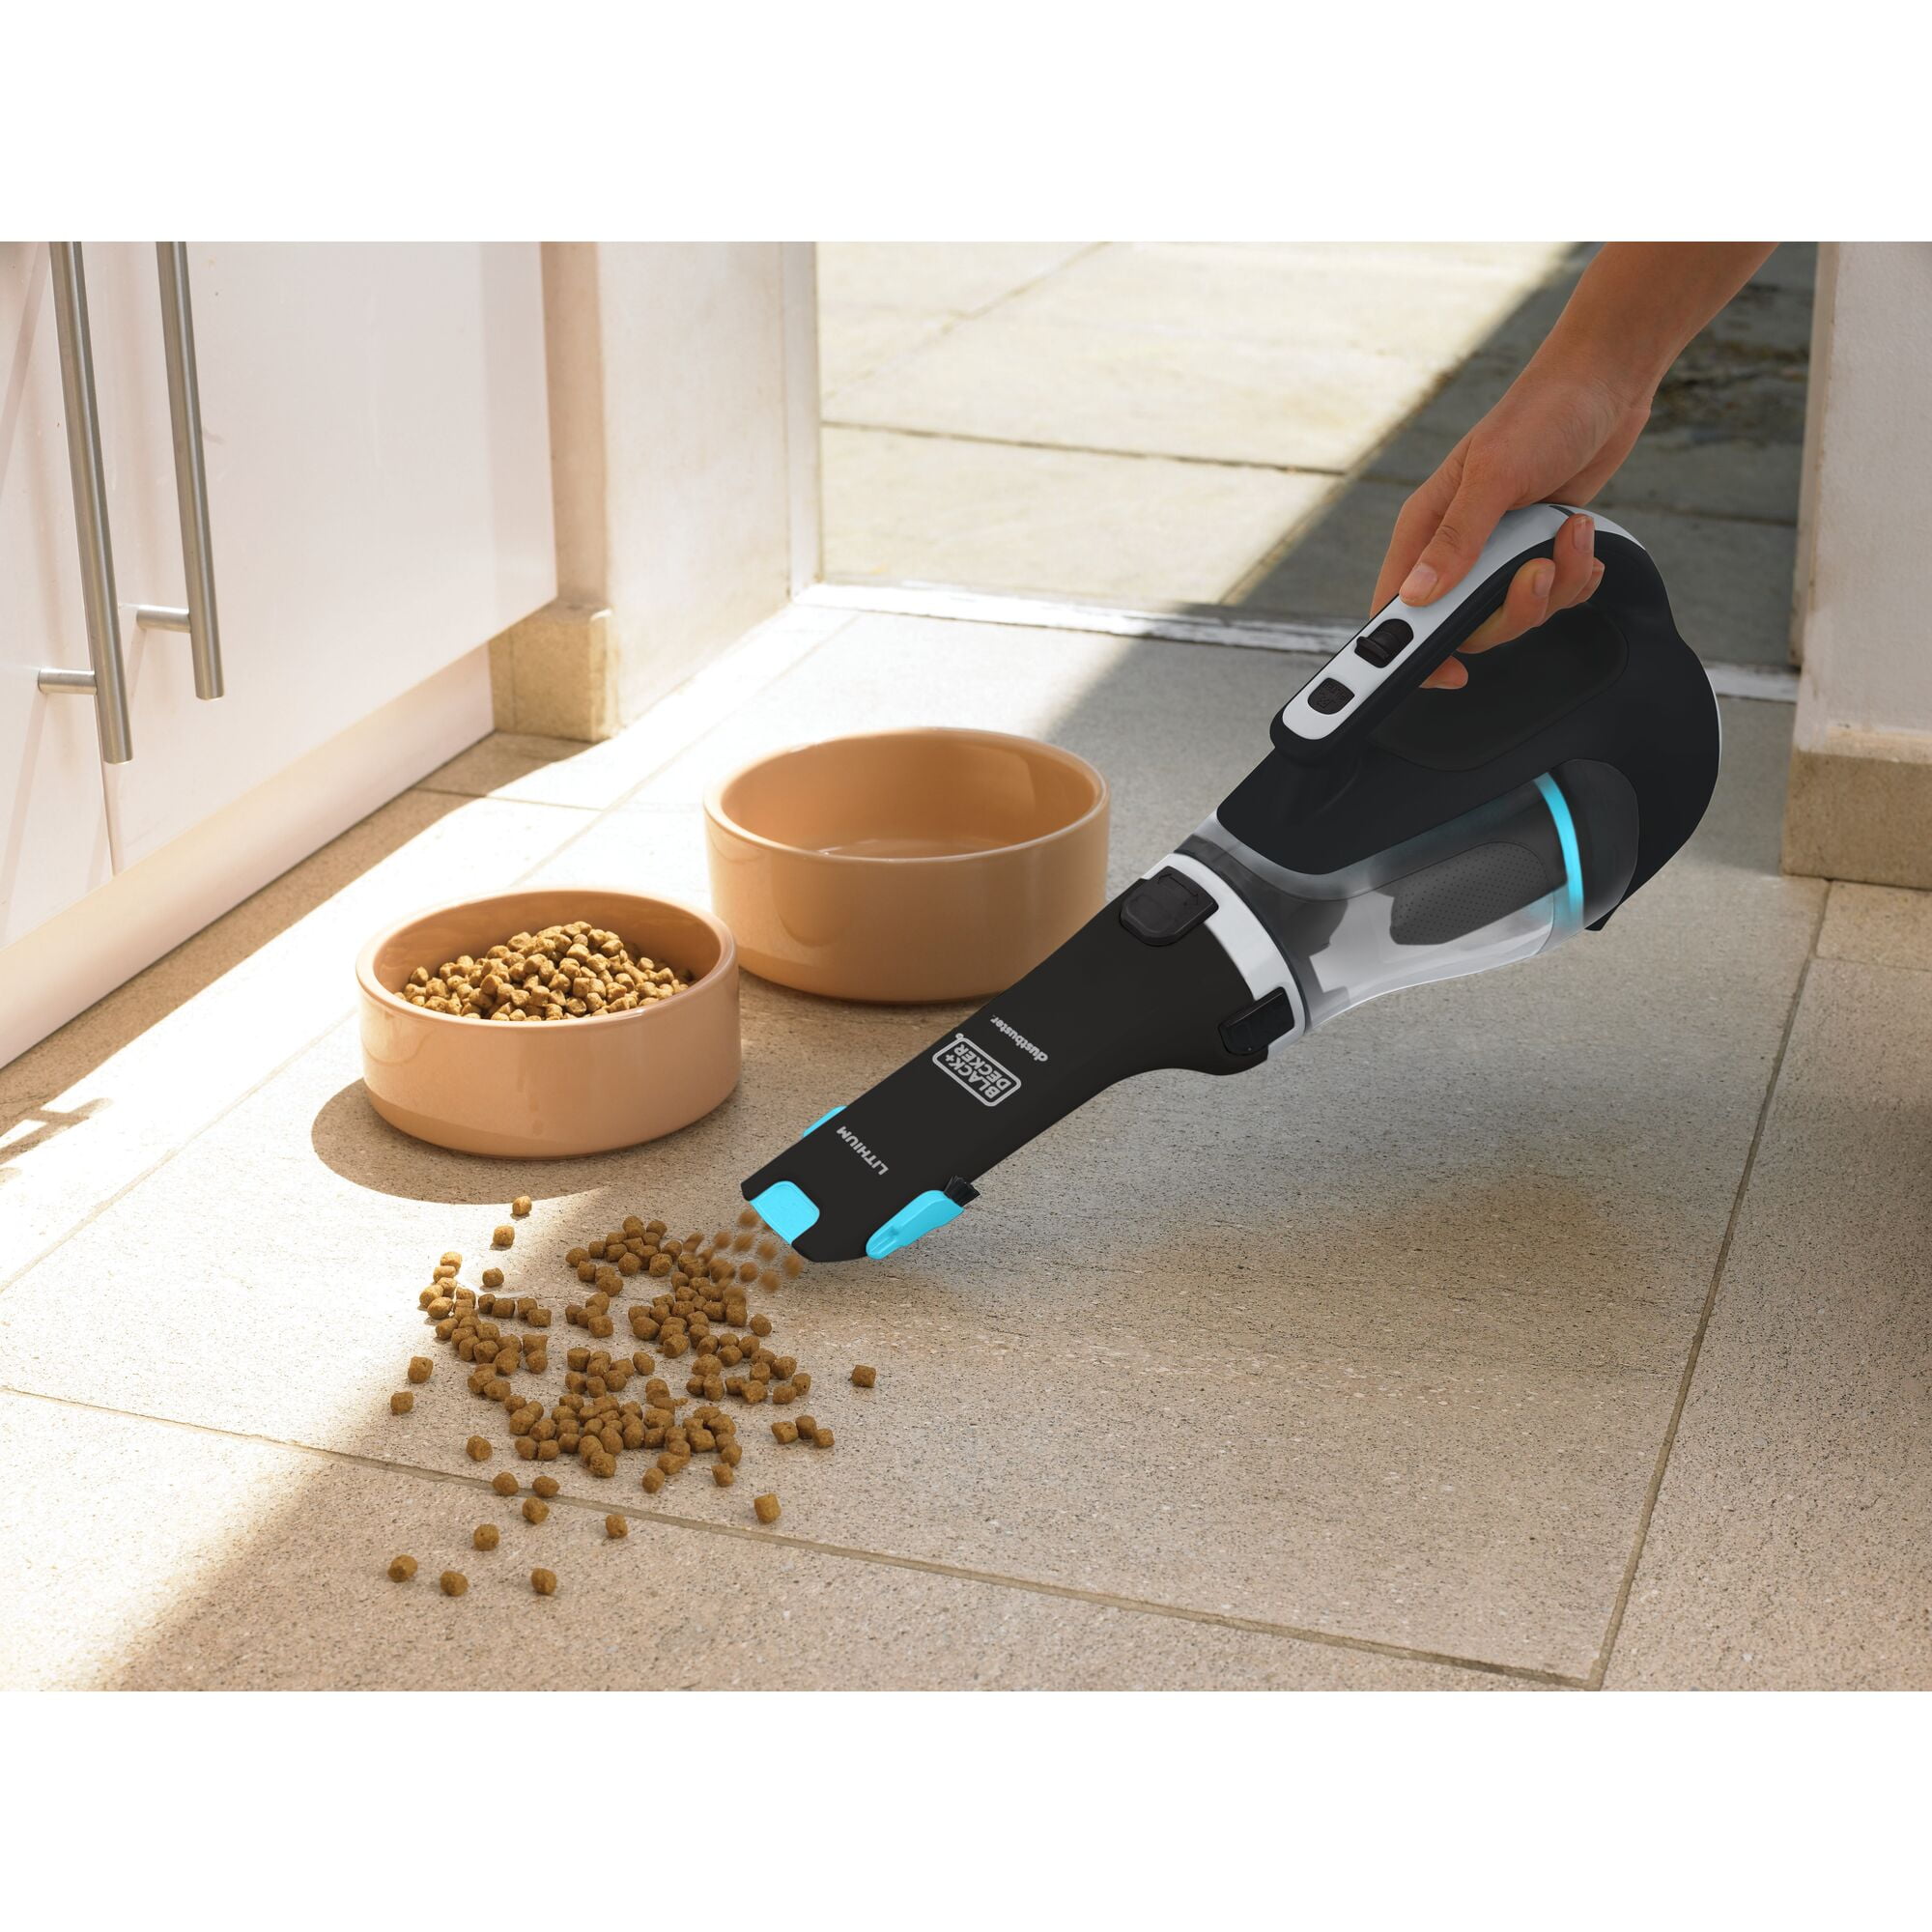 Grab this 'miracle' Black + Decker Dustbuster for just $49 during